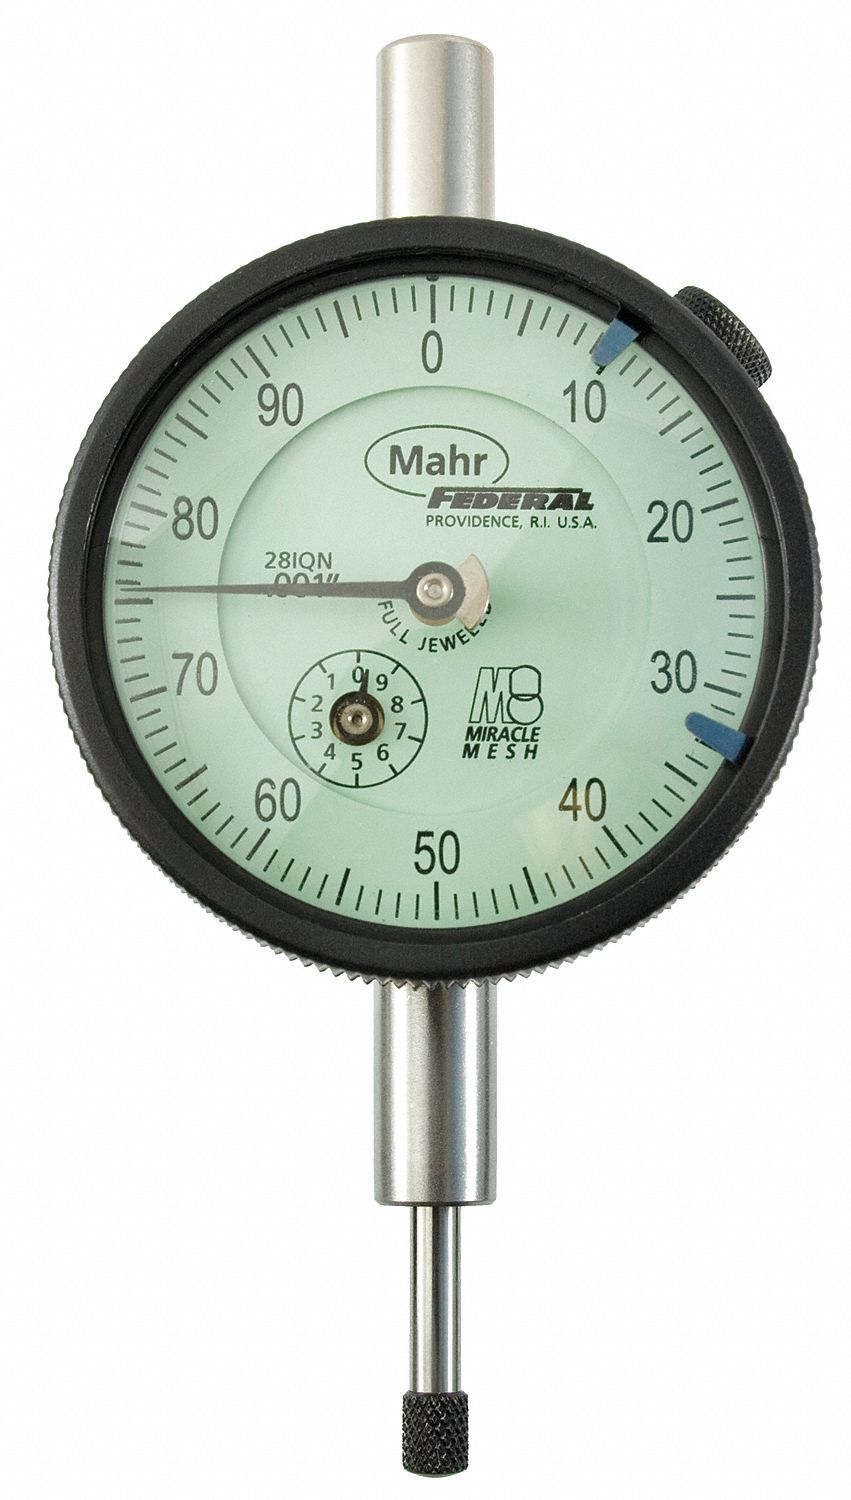 Mahr-Federal Inc Dial Test Indicator Swl Hd 0 to 0.020 in 